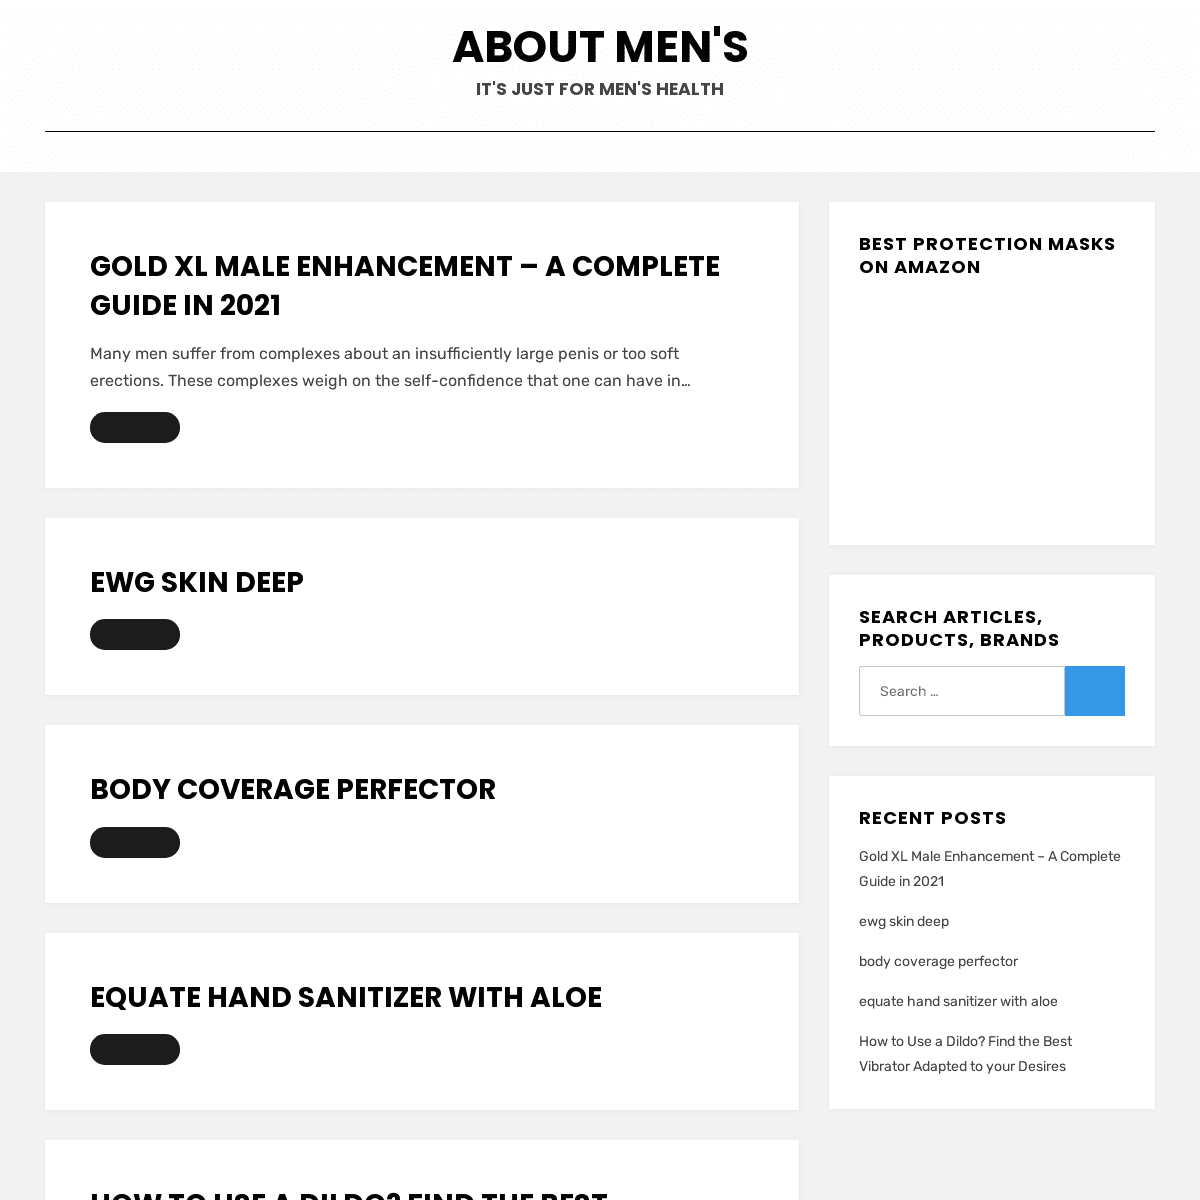 A complete backup of https://aboutmens.com